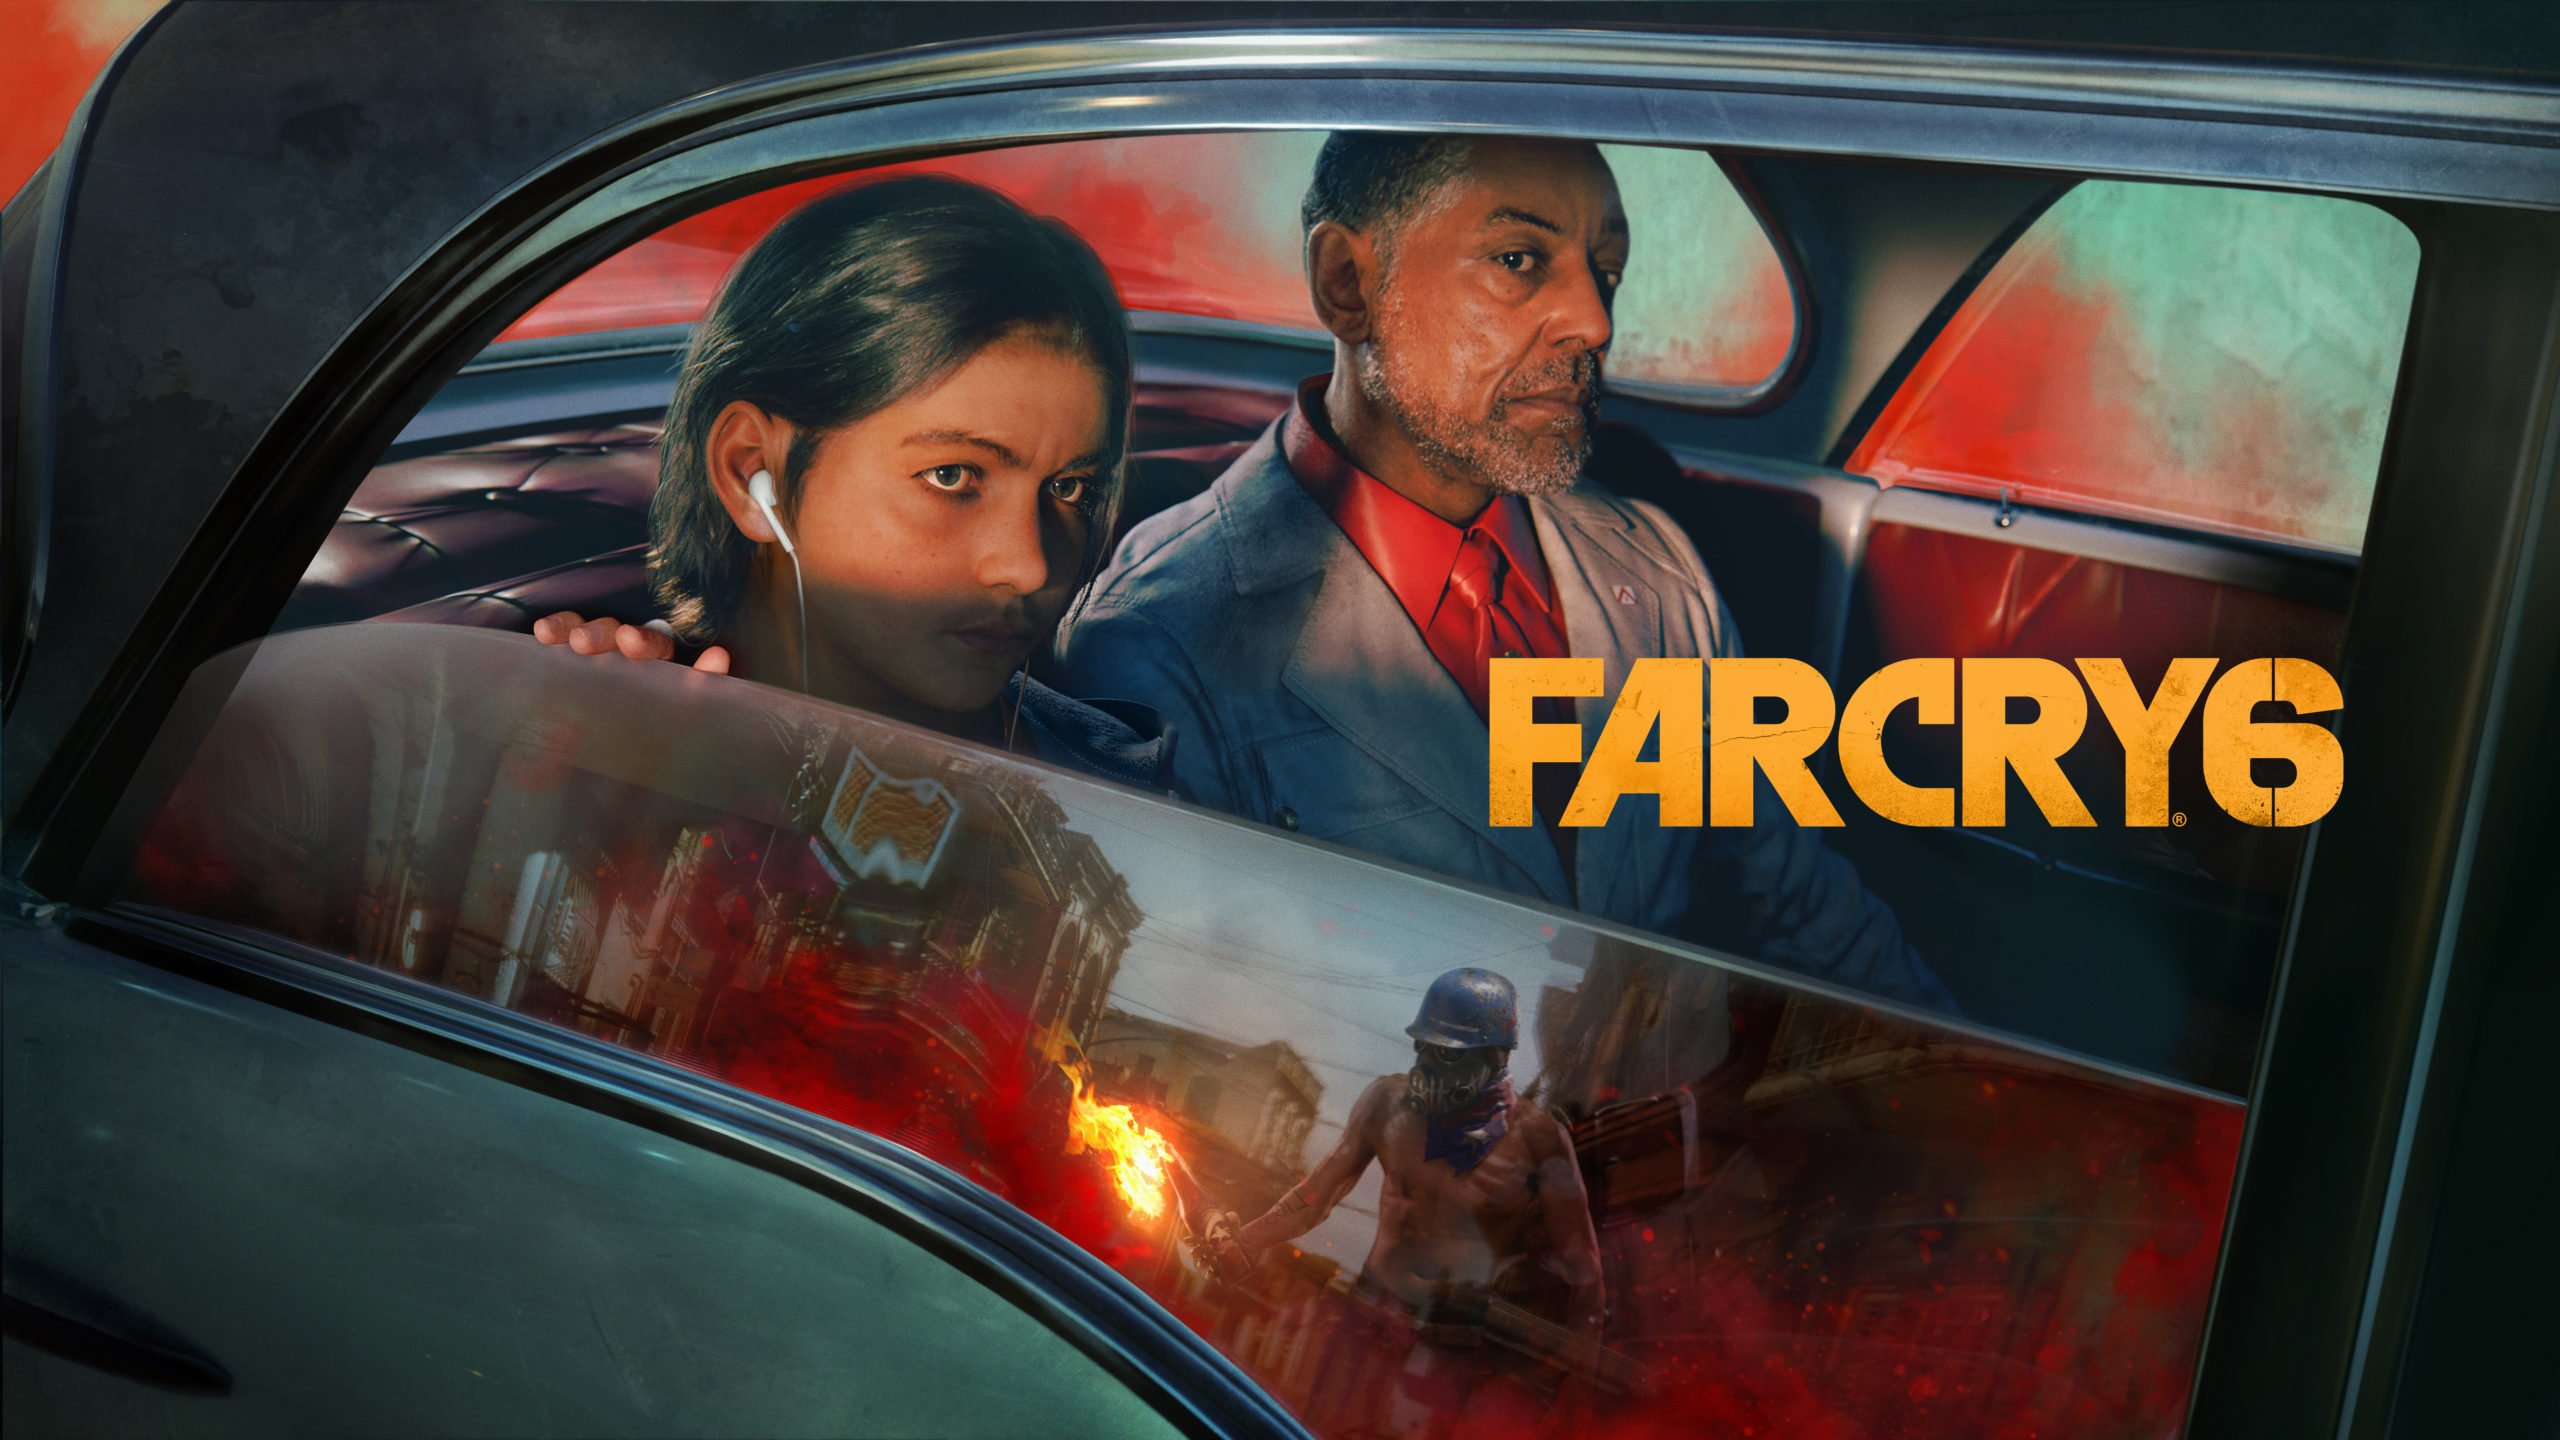 Buy Far Cry® 5 from the Humble Store and save 80%